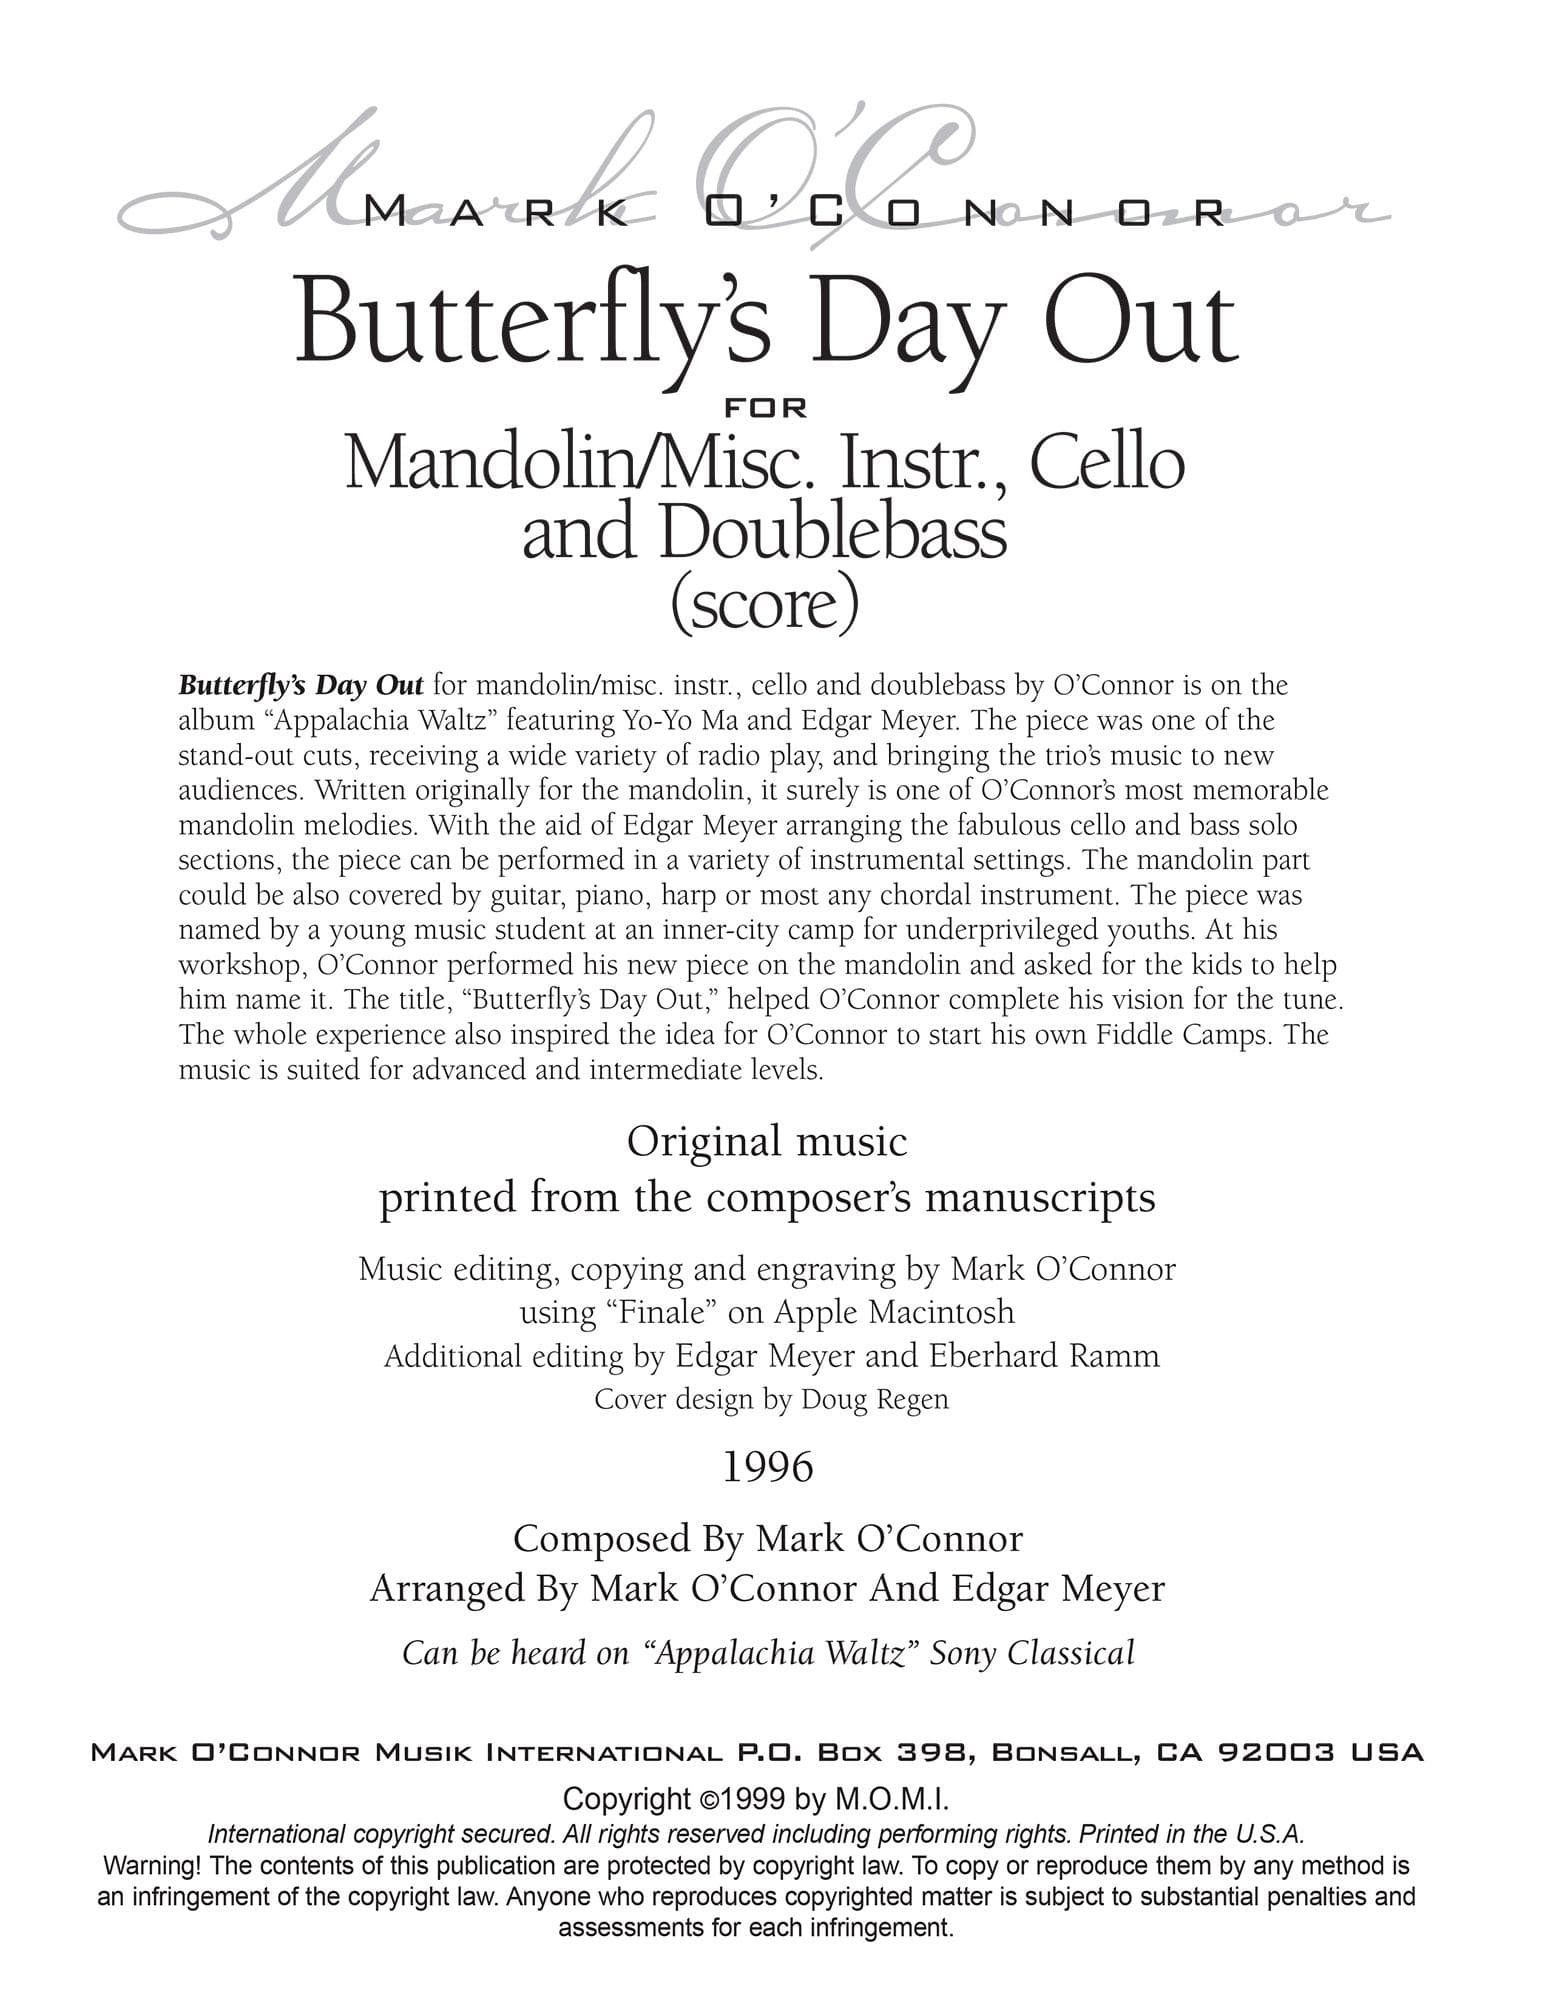 O'Connor, Mark - Butterfly's Day Out for Mandolin, Cello, and Bass - Score - Digital Download